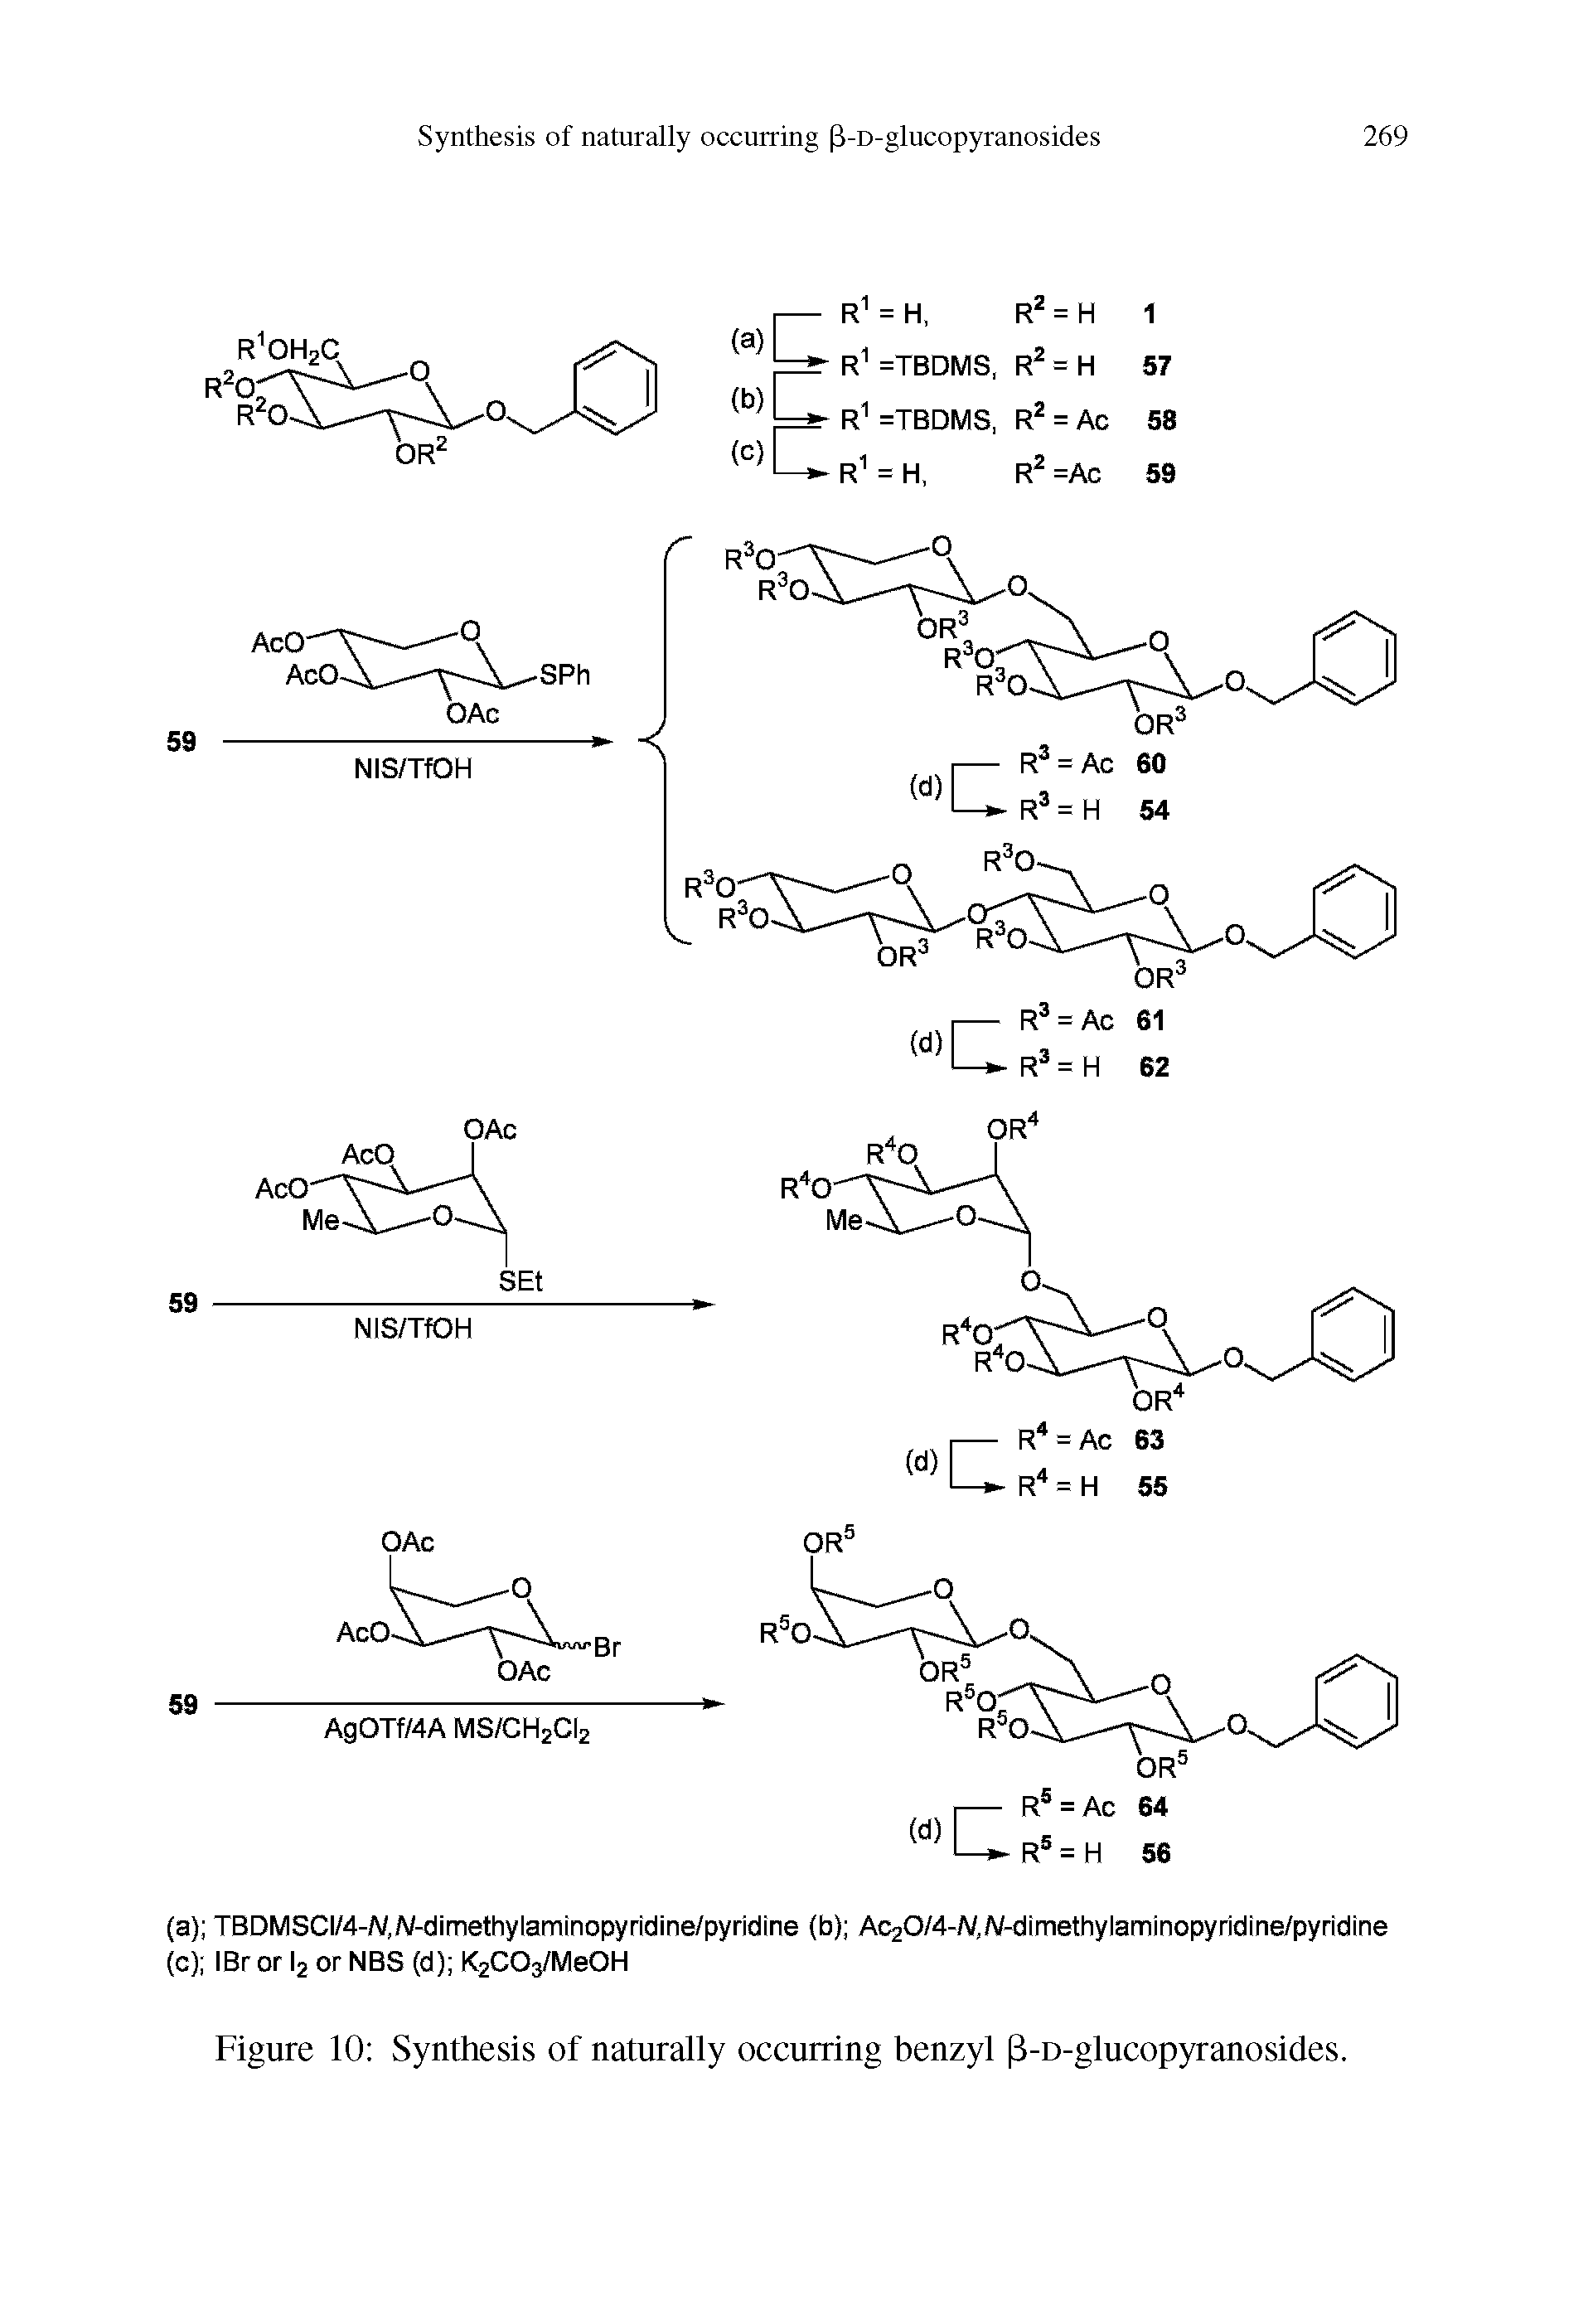 Figure 10 Synthesis of naturally occurring benzyl (3-D-glucopyranosides.